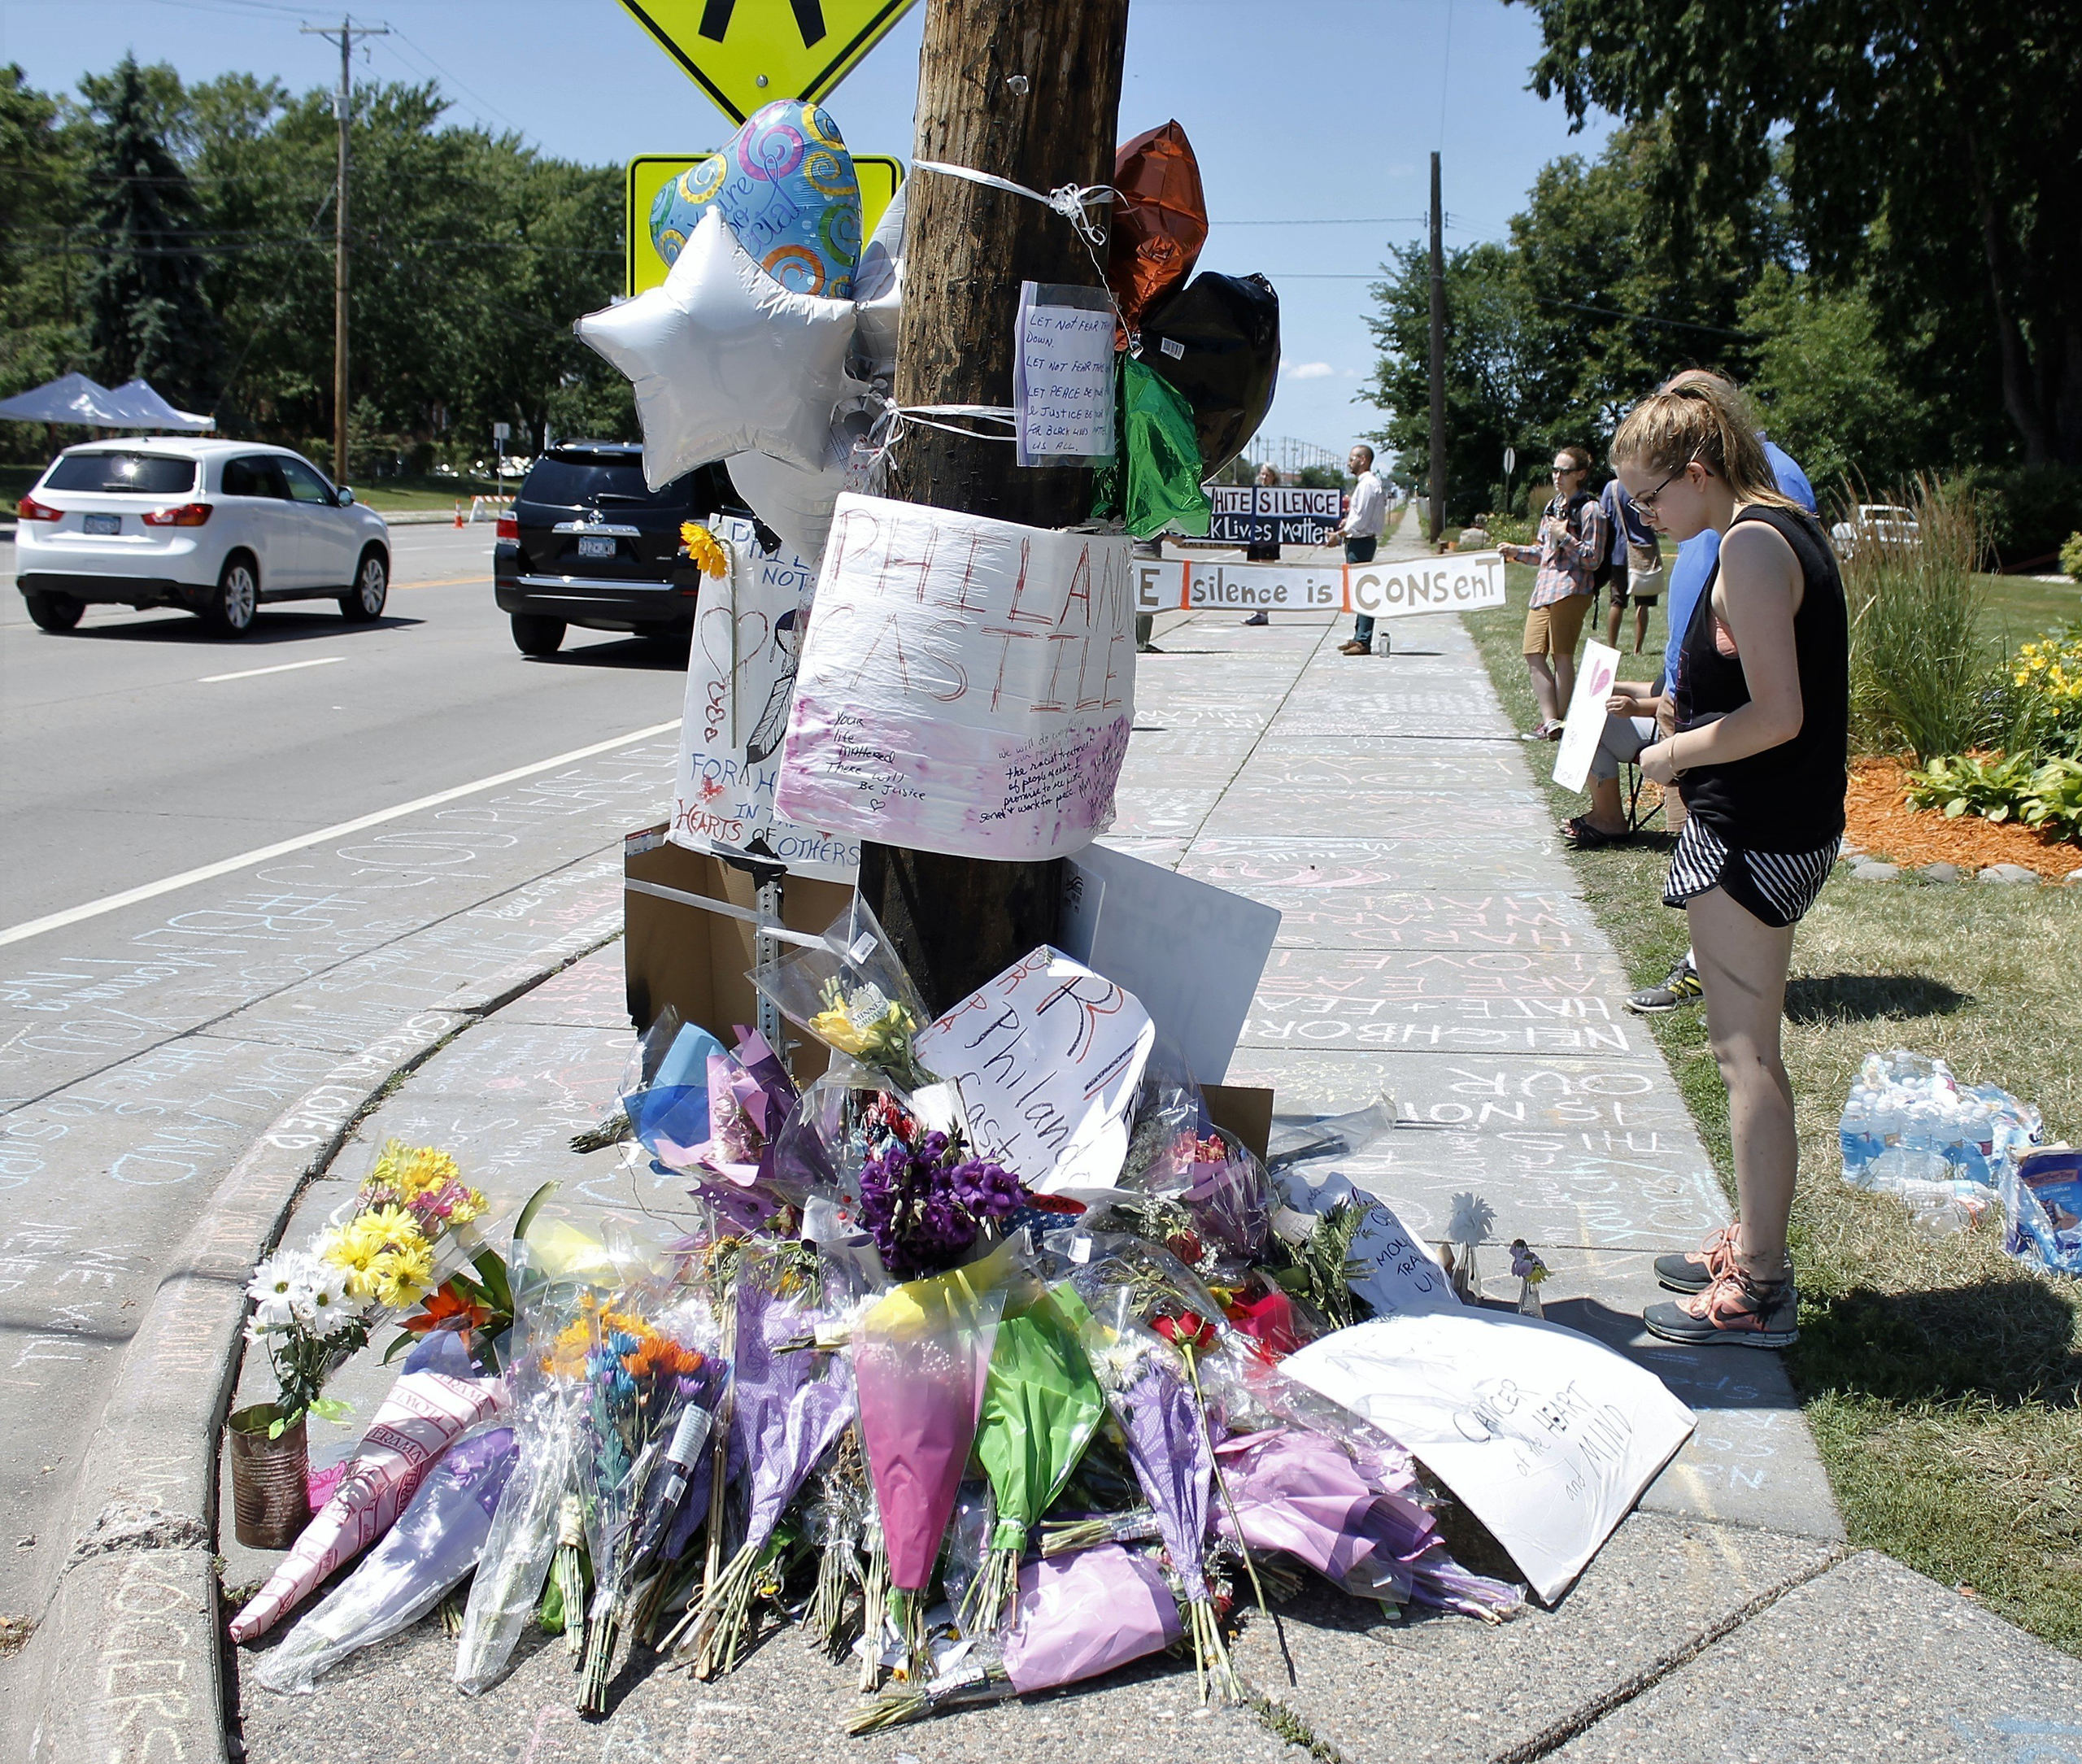 A person looks at a memorial in the Minneapolis suburb of Falcon Heights near the spot where Philando Castile was shot and killed by a police officer, July 9, 2016. (Skip Foreman—AP)